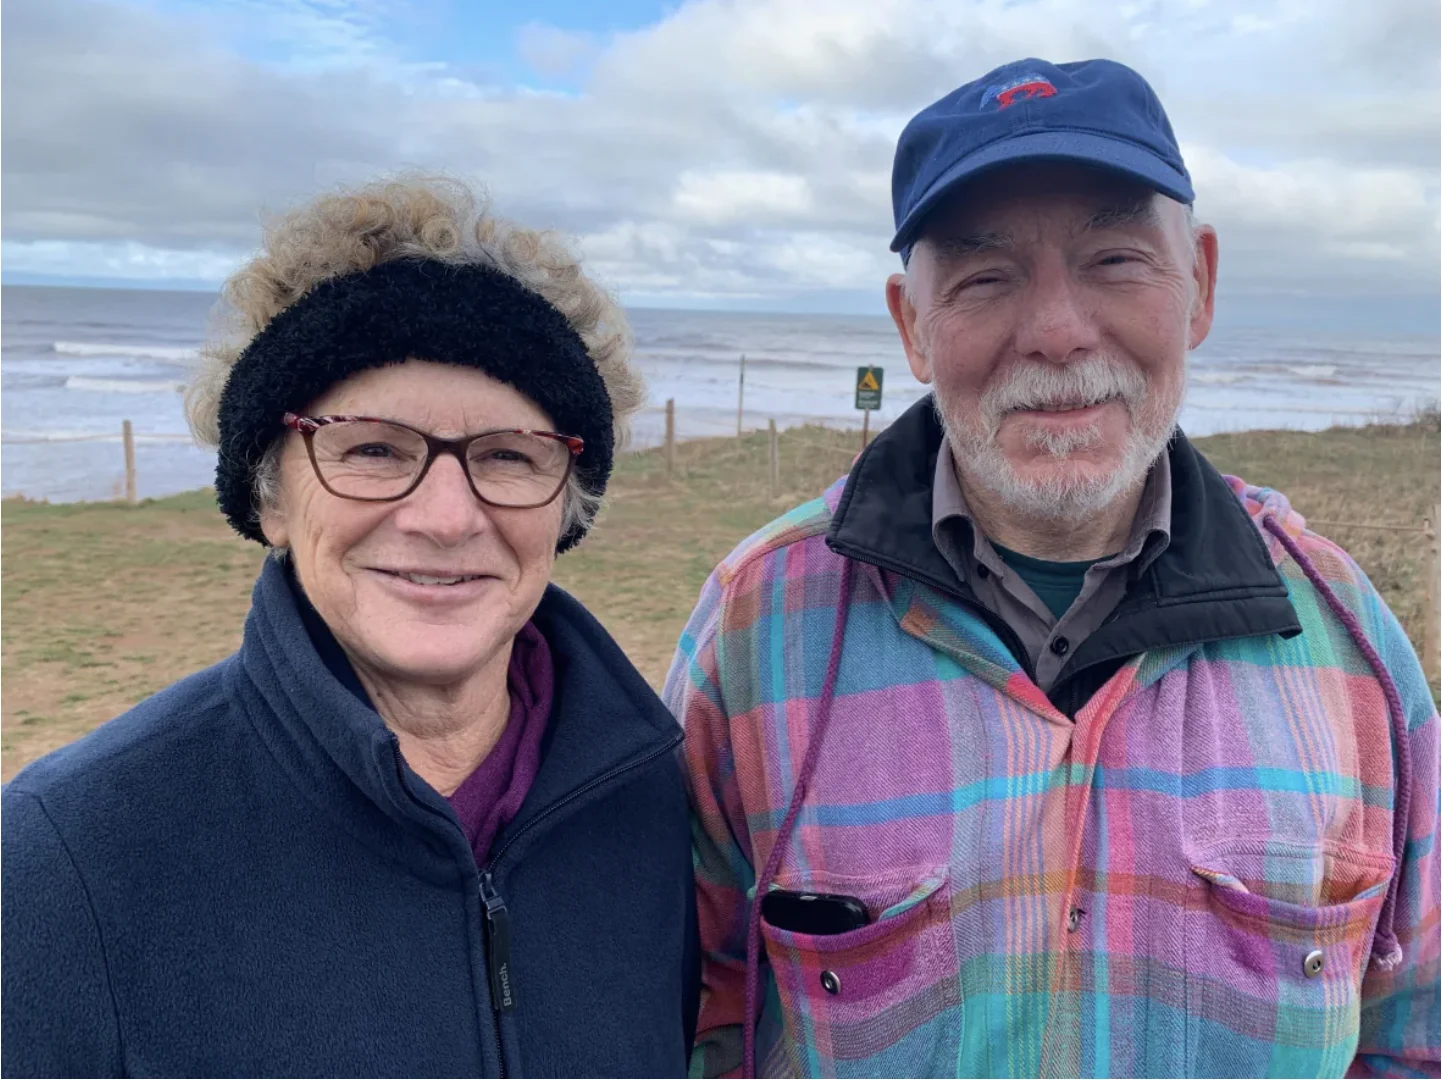 cbc: Michele Gallant and Greg Gillis say they are sad to see the arch collapse, but expect a new formation will take shape somewhere else. (Tony Davis/CBC)